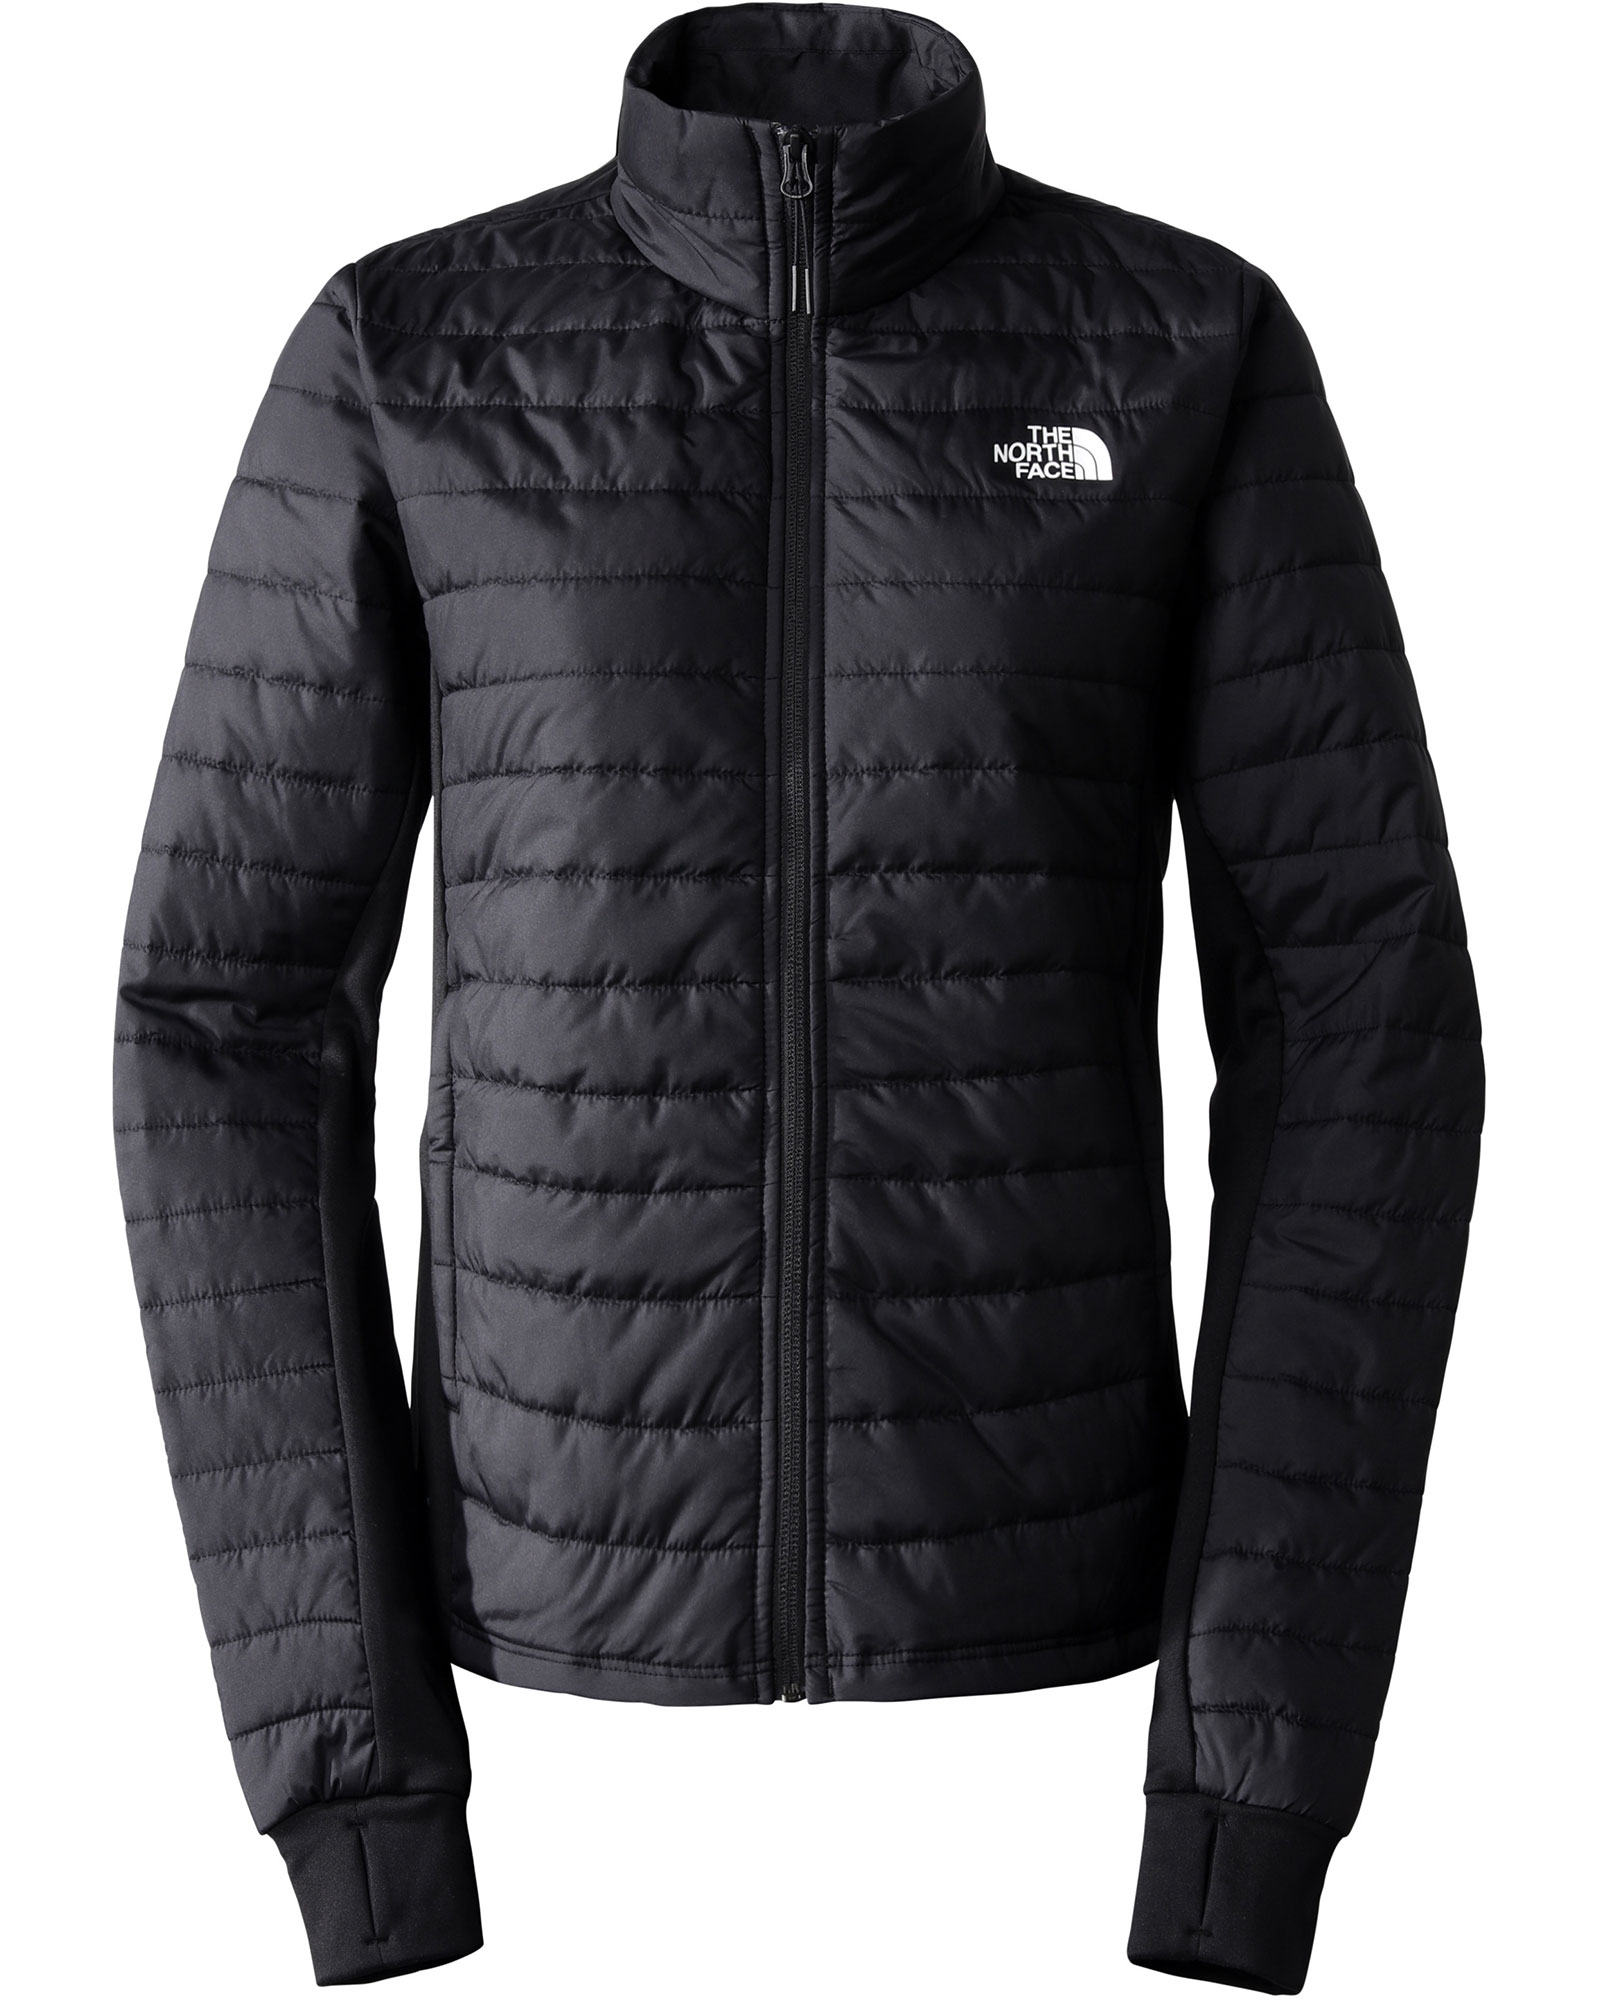 The North Face Canyonlands Hybrid Women’s Insulated Jacket - TNF Black XS